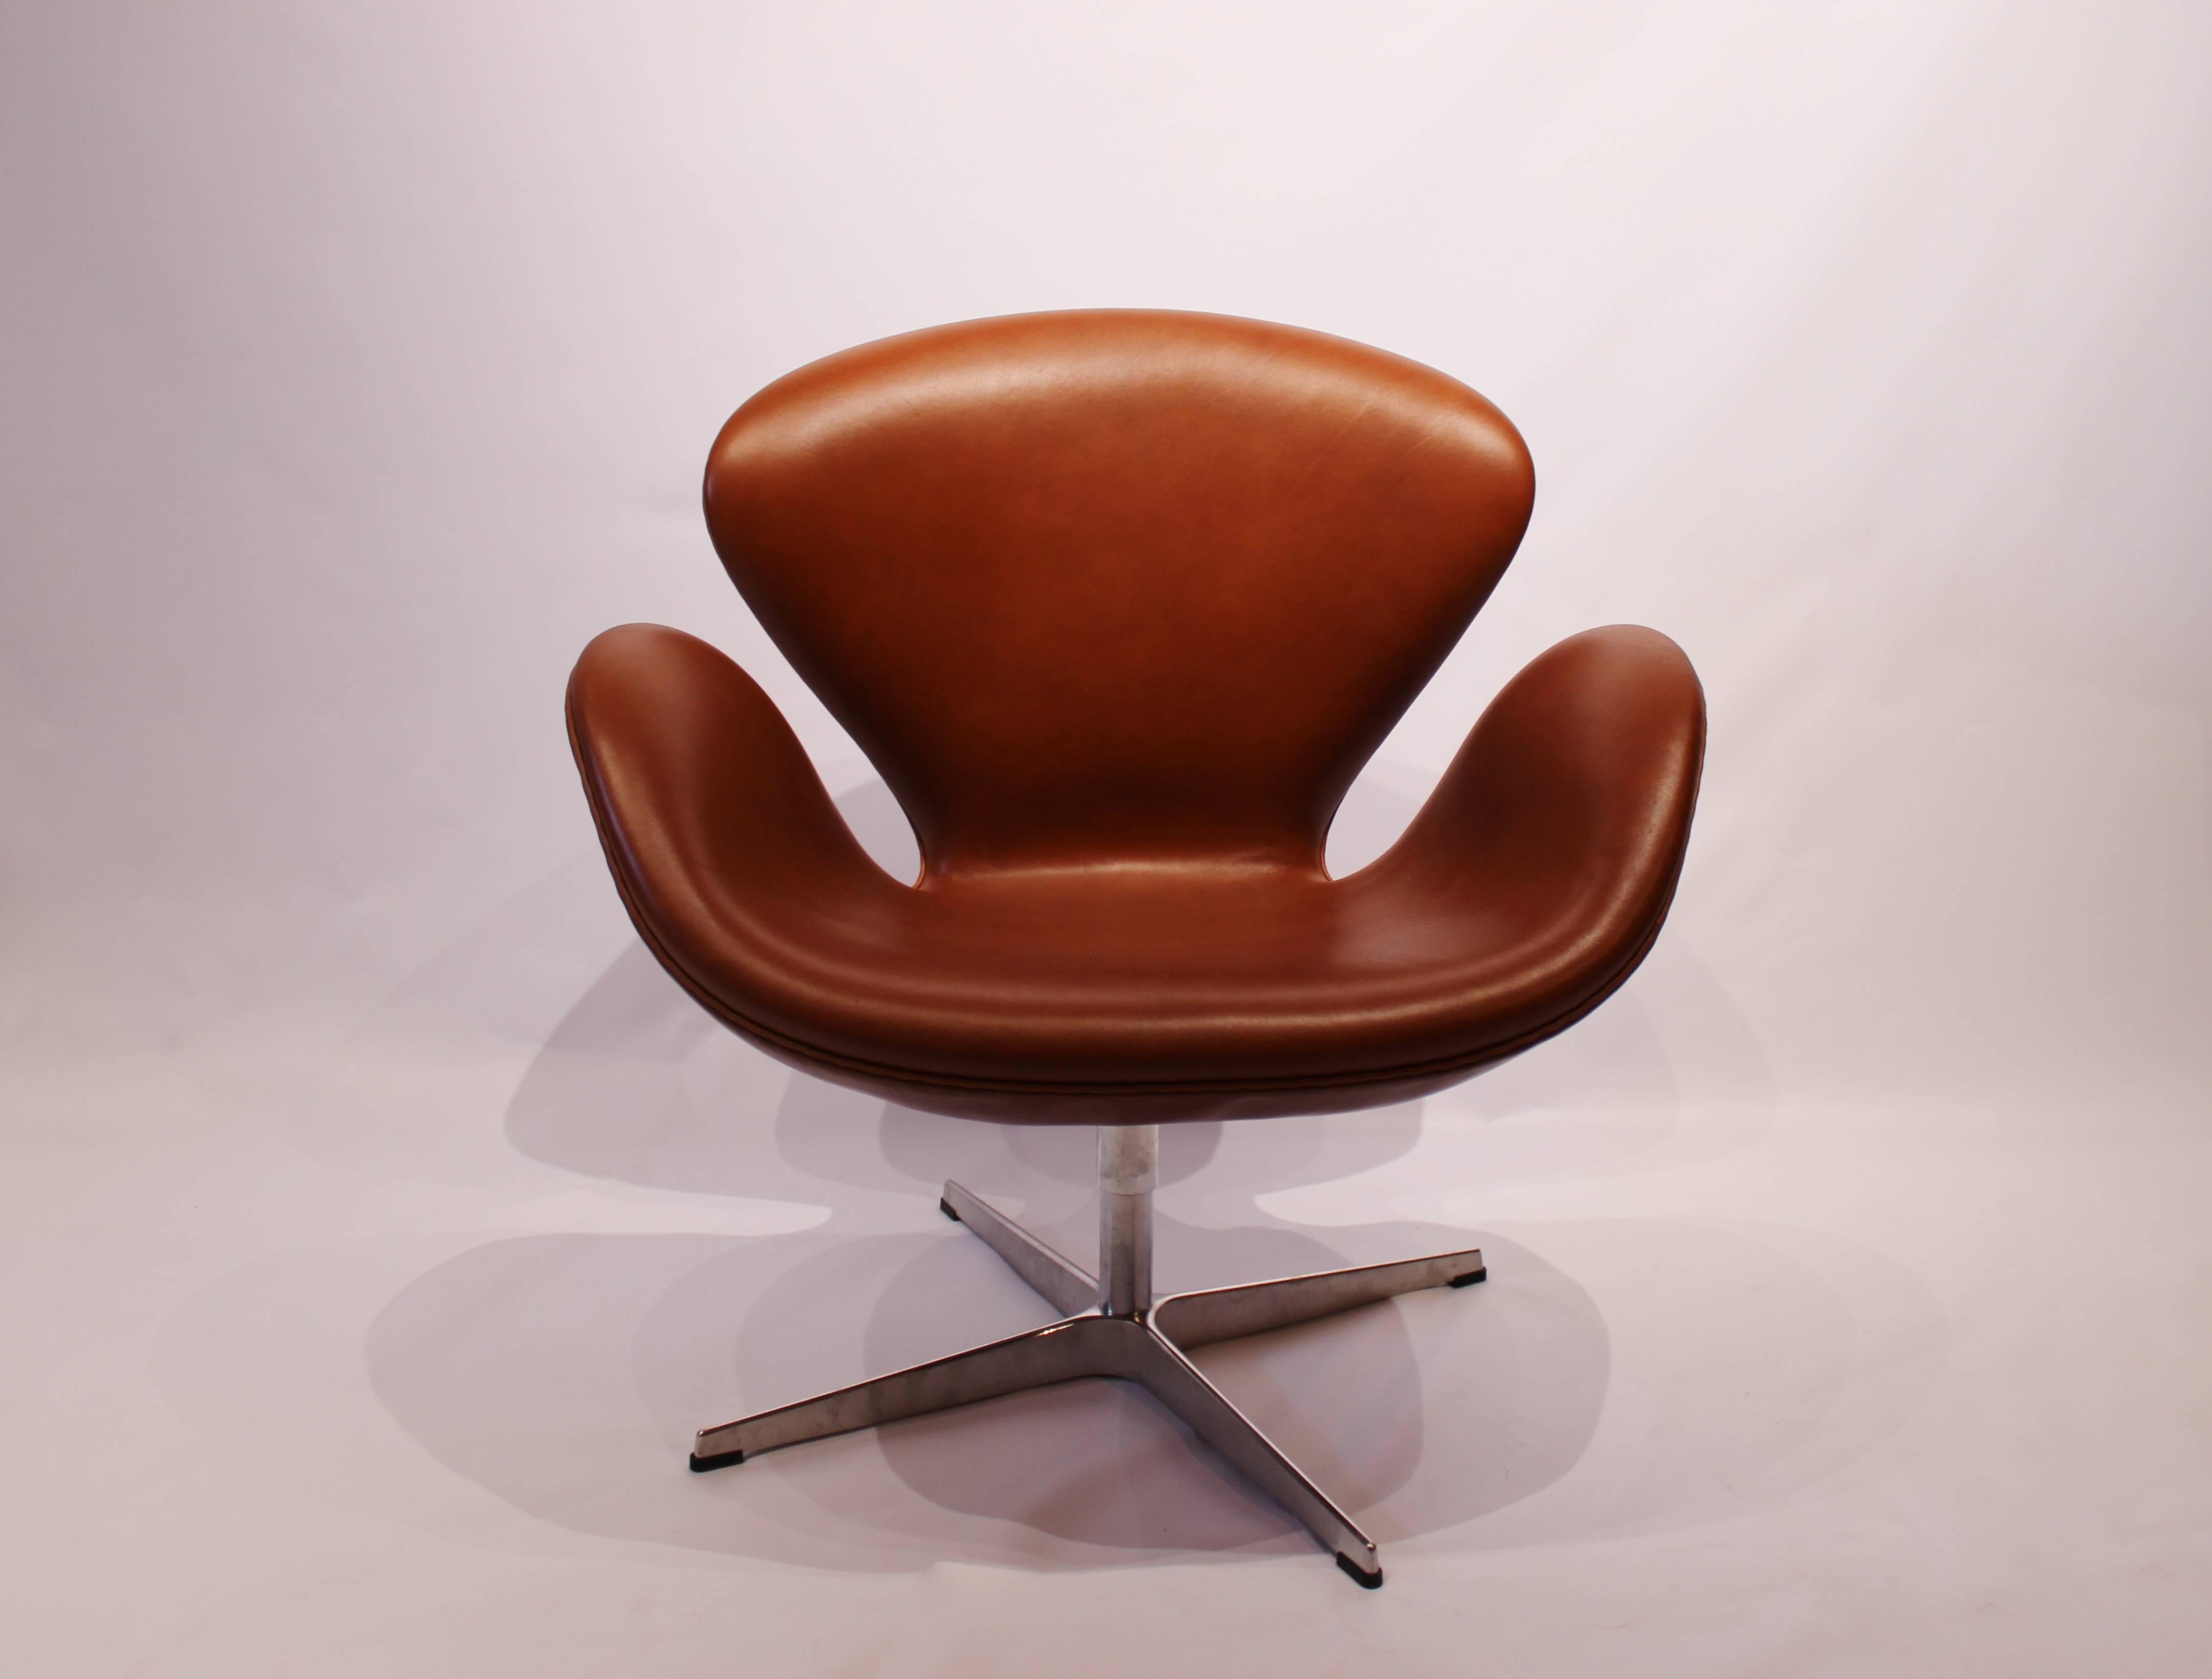 Swan chair, model 3320, designed by Arne Jacobsen in 1958 and manufactured by Fritz Hansen in 2015. The chair is upholstered in walnut elegance leather and is in great vintage condition.